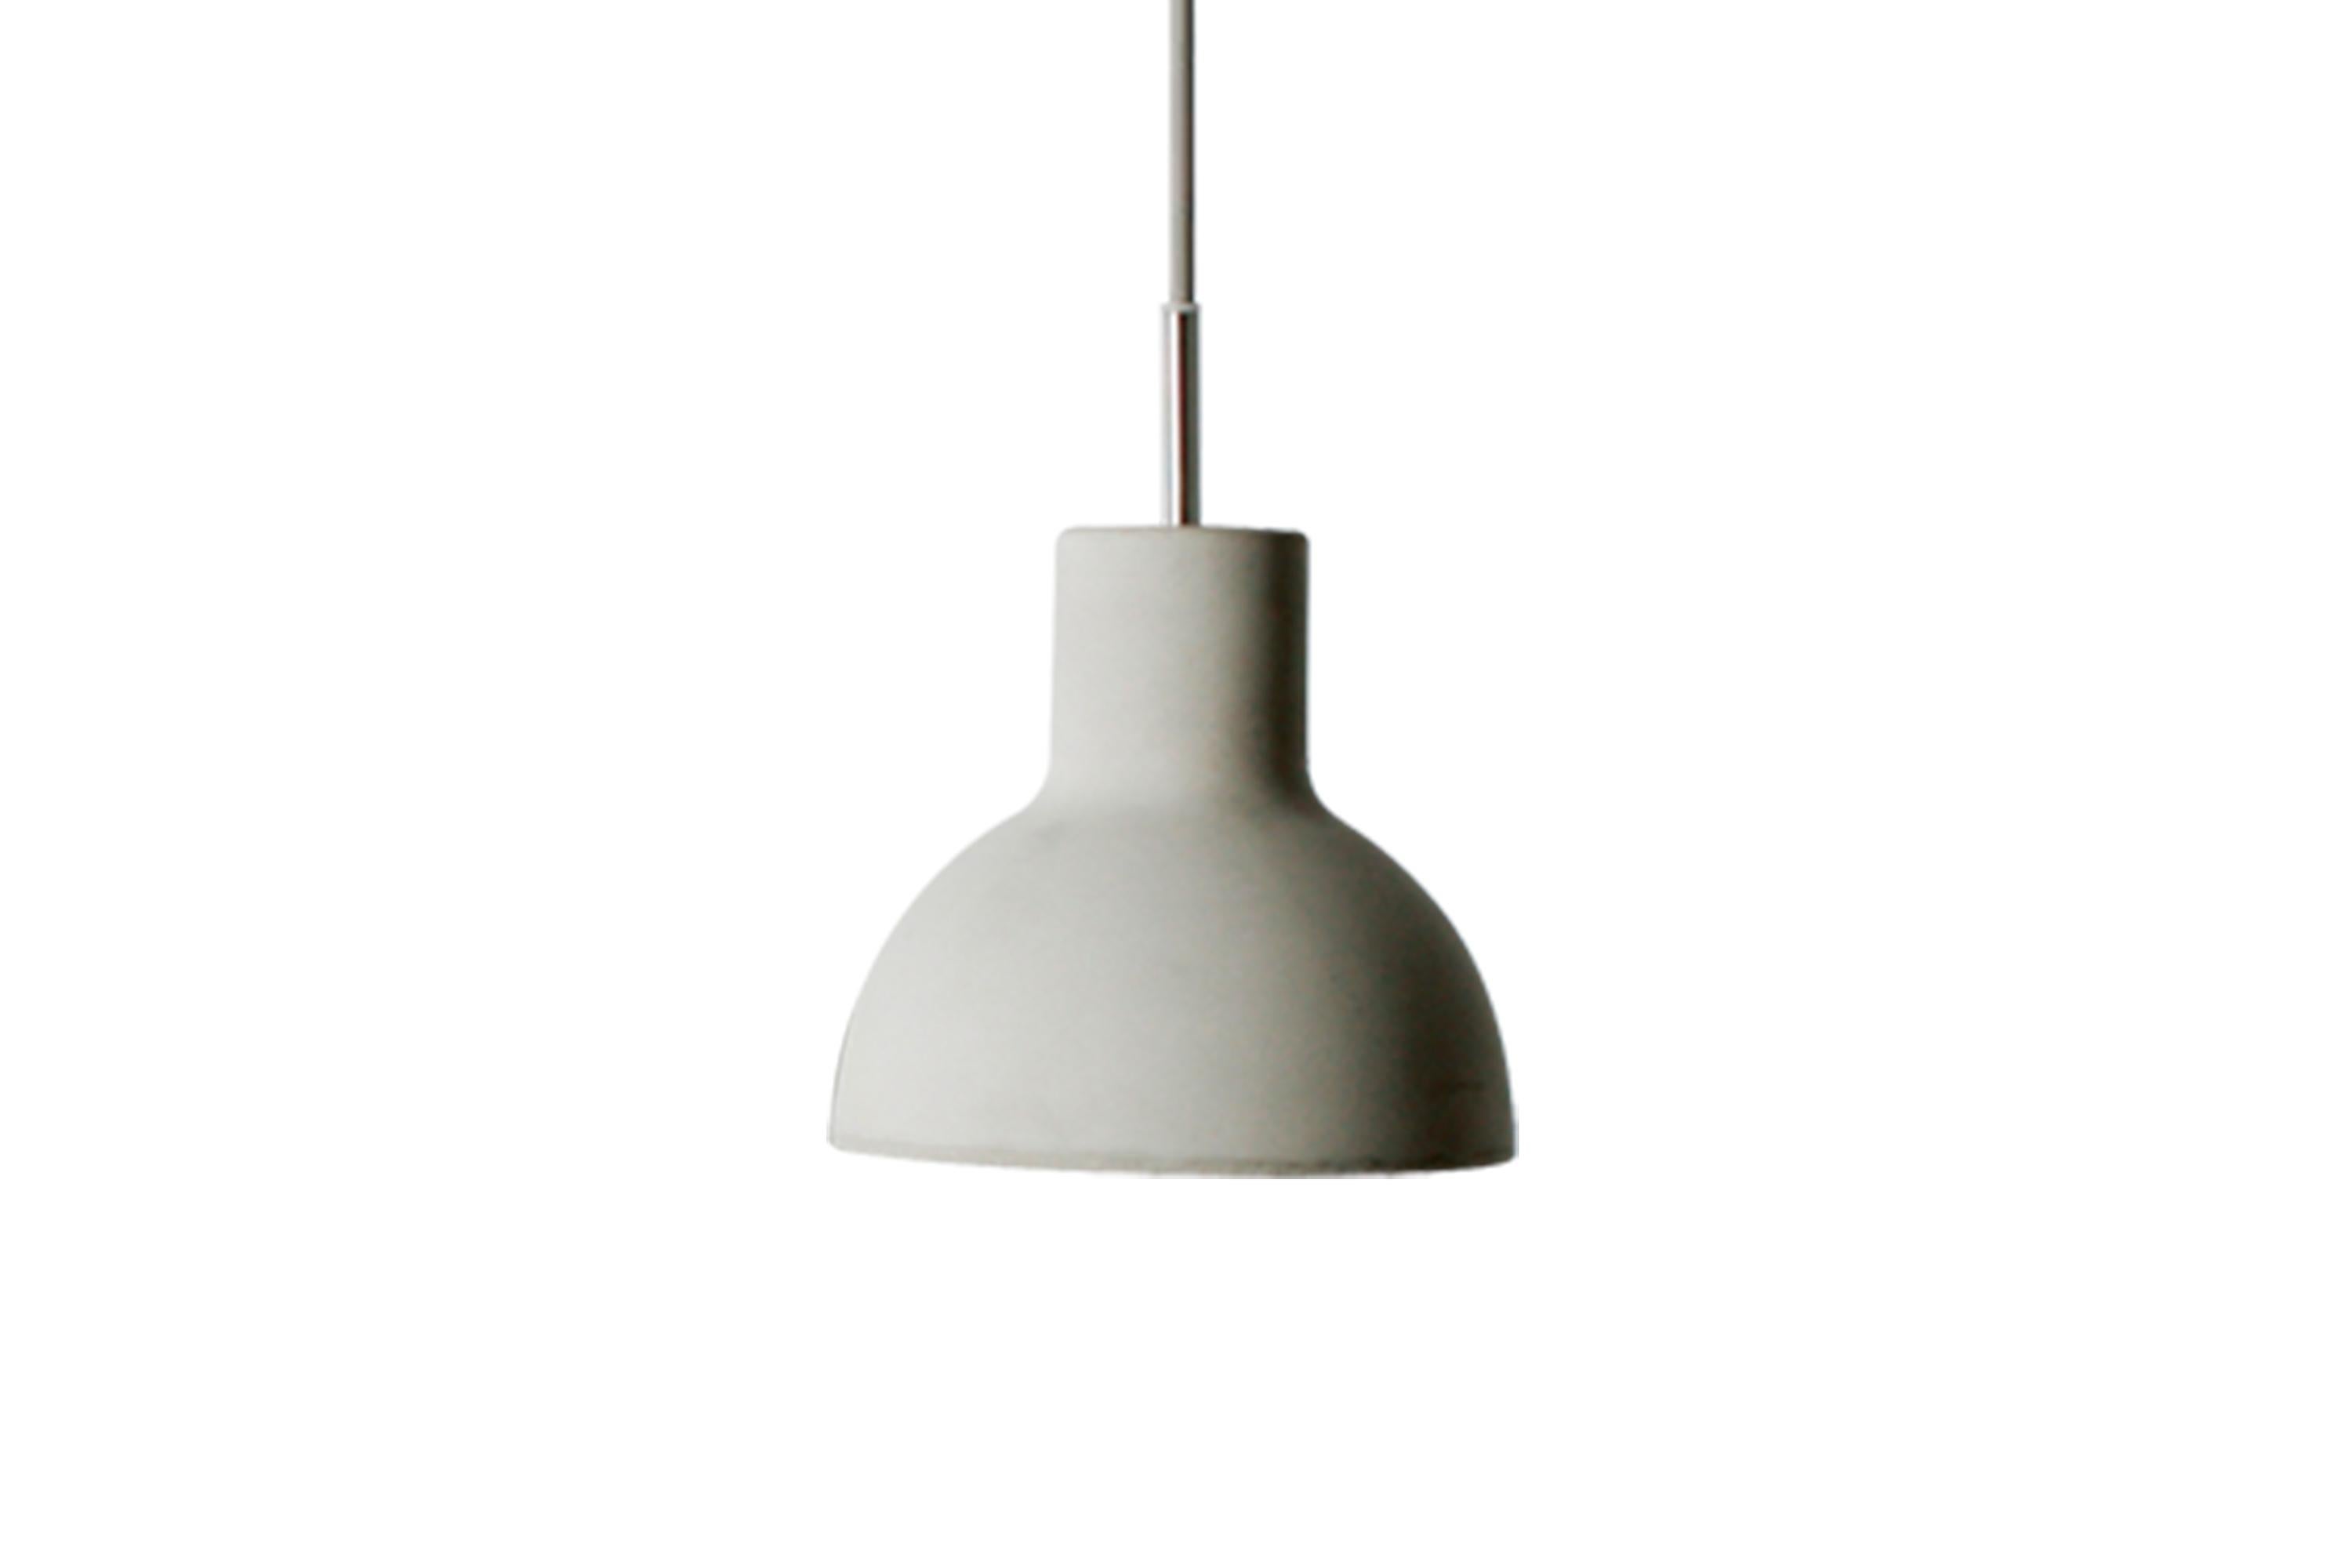 CASTLE desires to challenge your every perception of texture and lighting. As a material, concrete is exceptionally energy efficient compared to that of metal or glass. By using concrete as a lampshade the CASTLE BELL Pendant has responsibly kept in